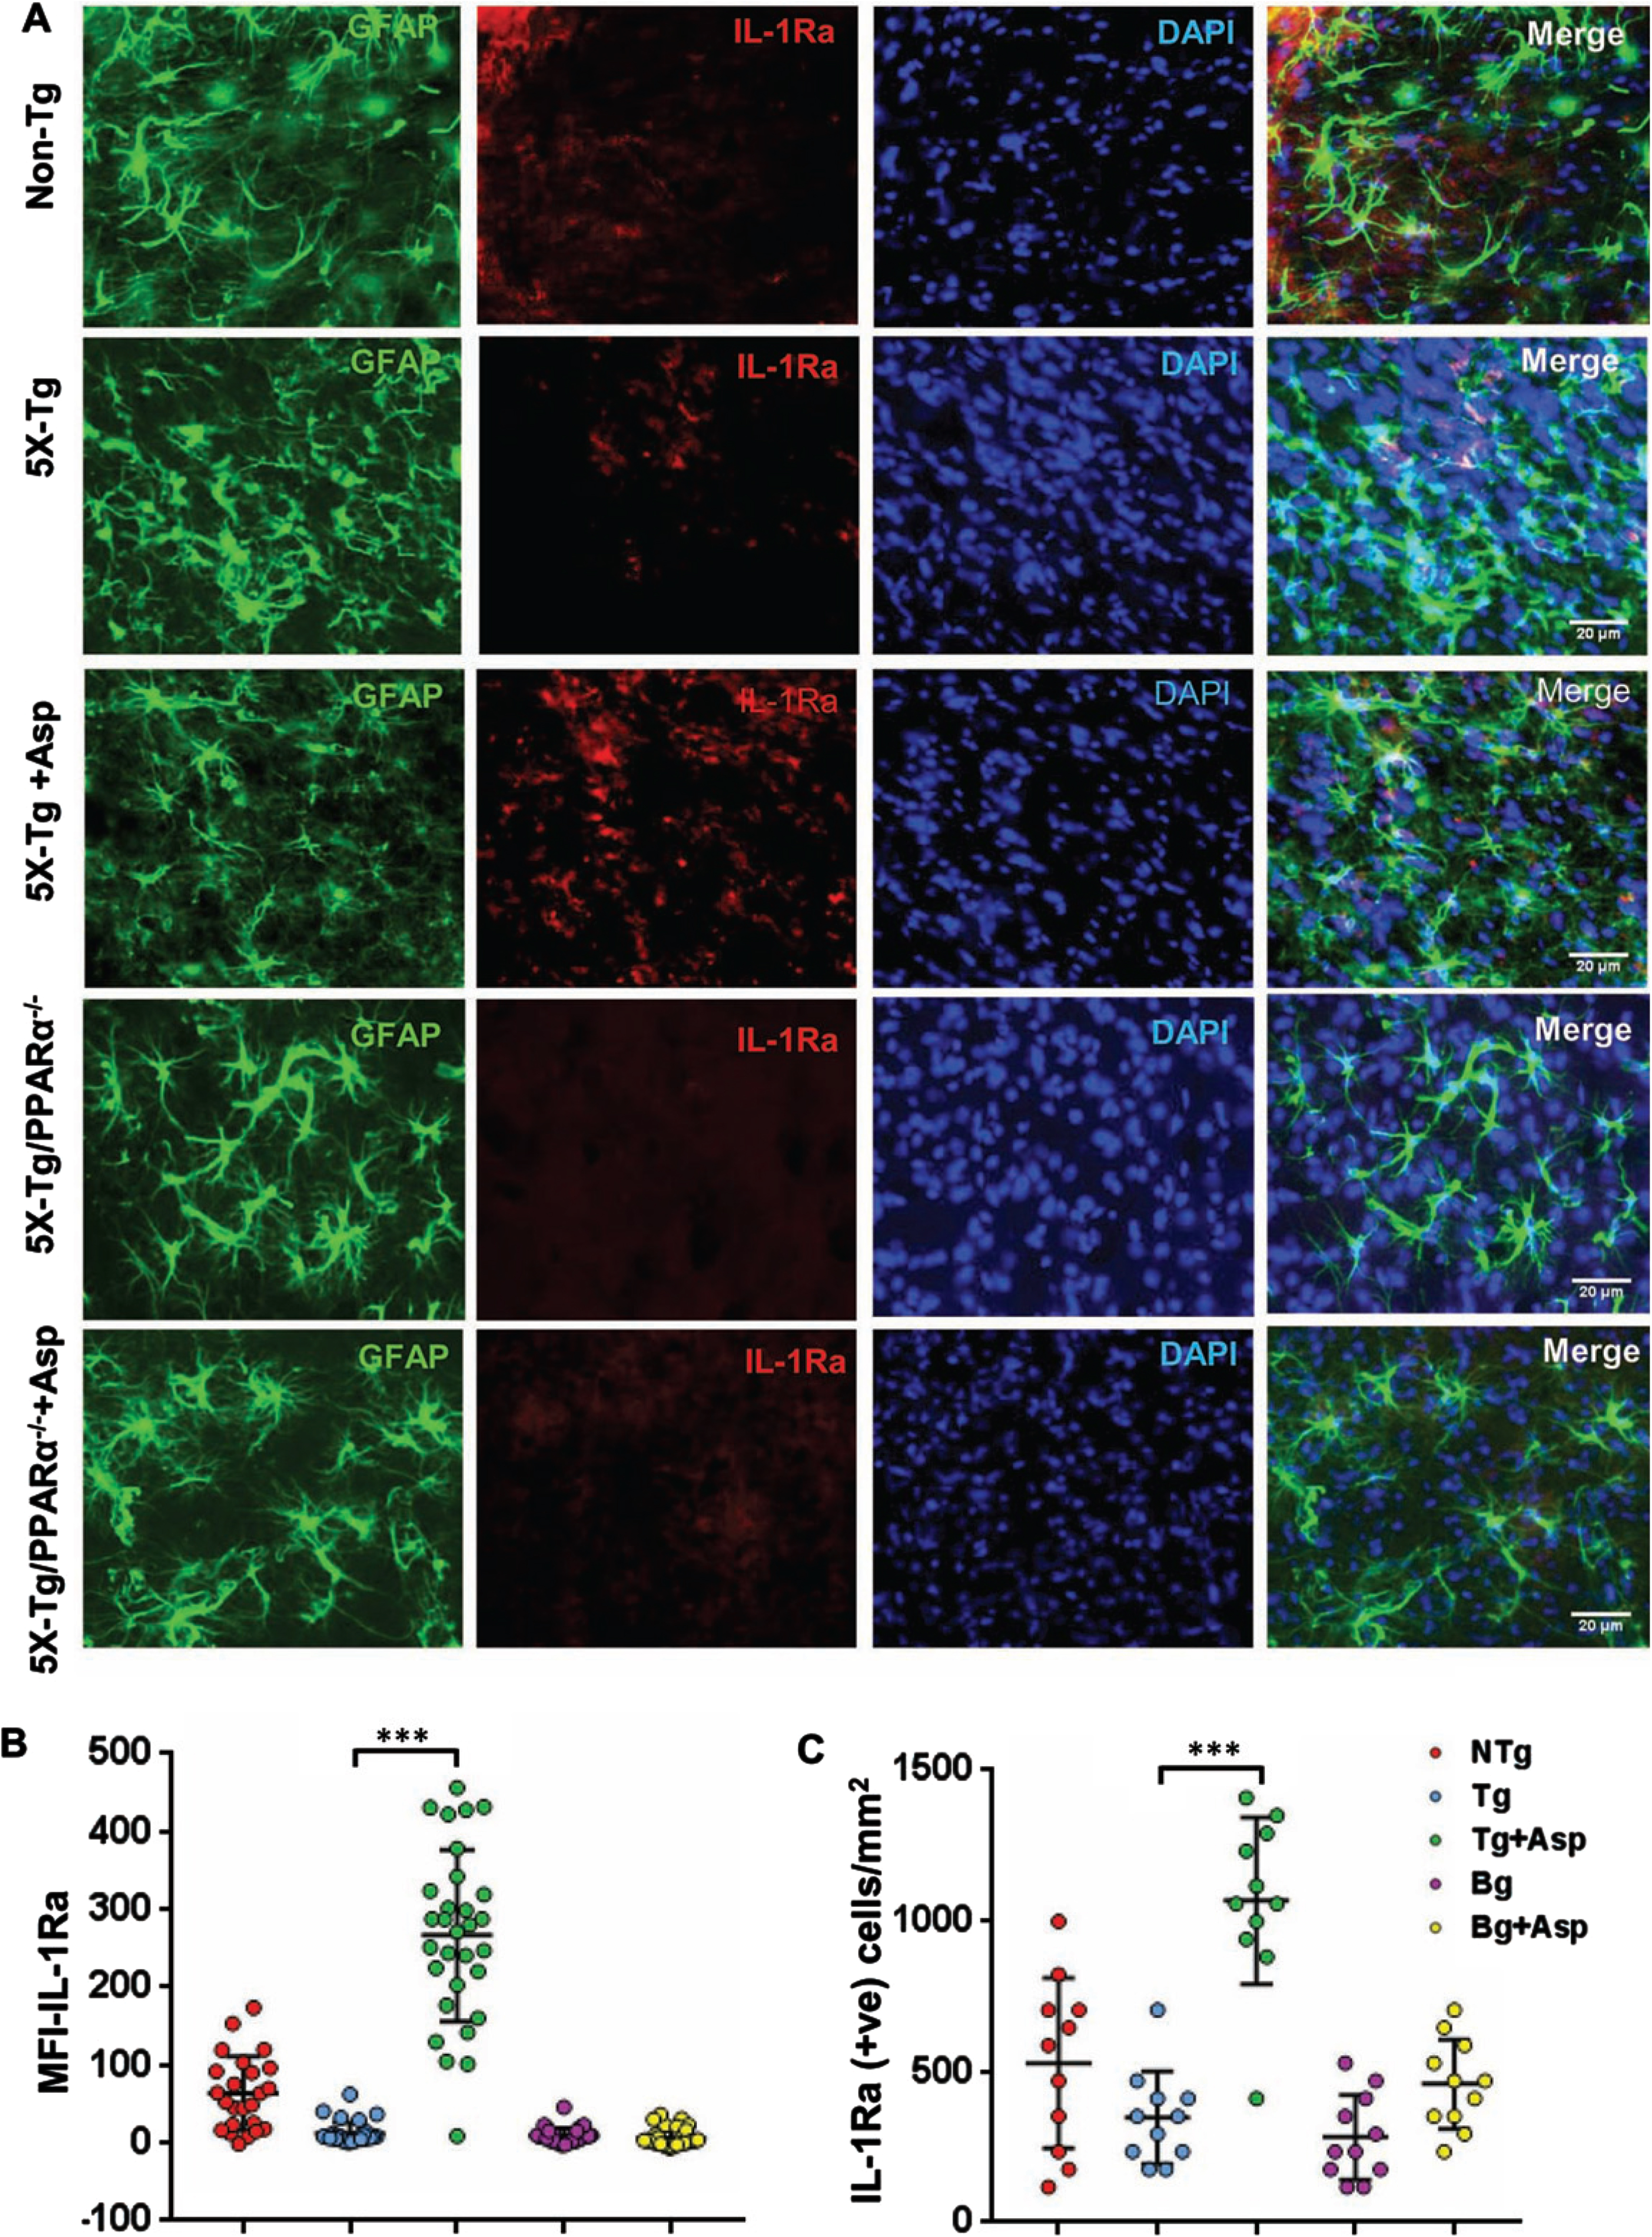 Aspirin treatment increases IL-1Ra in vivo in cortical astrocytes of 5XFAD mice via PPARα. Six-month old 5xFAD and 5xFAD/PPARα–/– mice (n = 5 or 6 per group) were treated with aspirin (2 mg/kg body weight/d) orally via gavage for 30 d followed by double-labeling of cortical sections for IL-1Ra and GFAP (A). Mean Fluorescence Intensity (MFI) of IL-1Ra was calculated in one section (two images per section) of each of five or six mice per group (B). IL-1Ra positive cells were counted in one section (two images per section) of each of five or six mice per group (C) and results were analyzed by one-way ANOVA. ***p < 0.001.